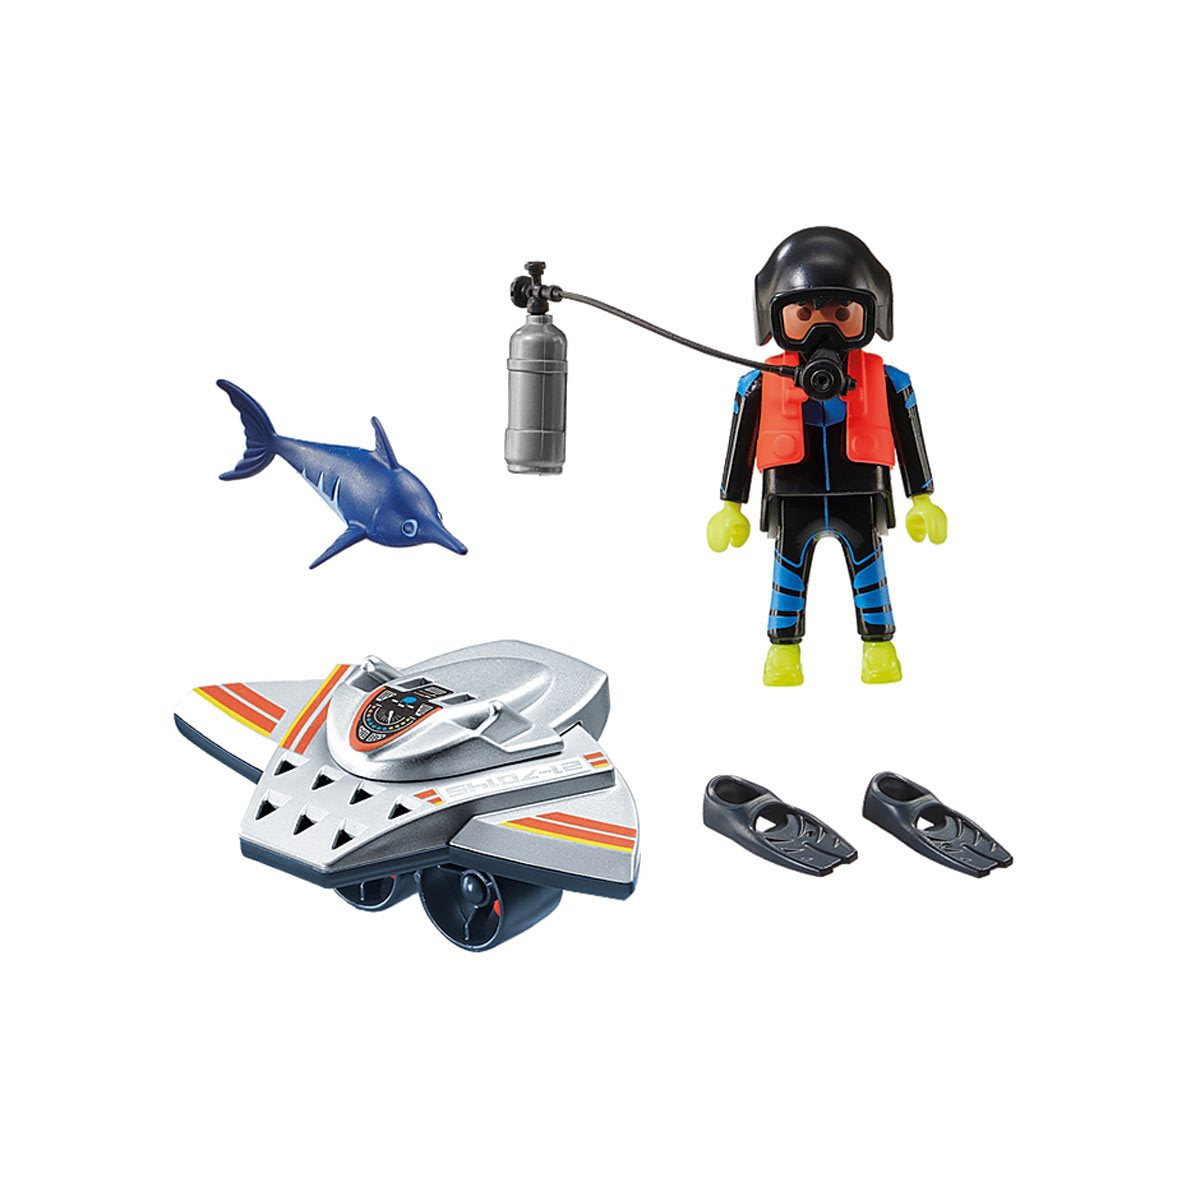 Playmobil - City Action: Diving Scooter